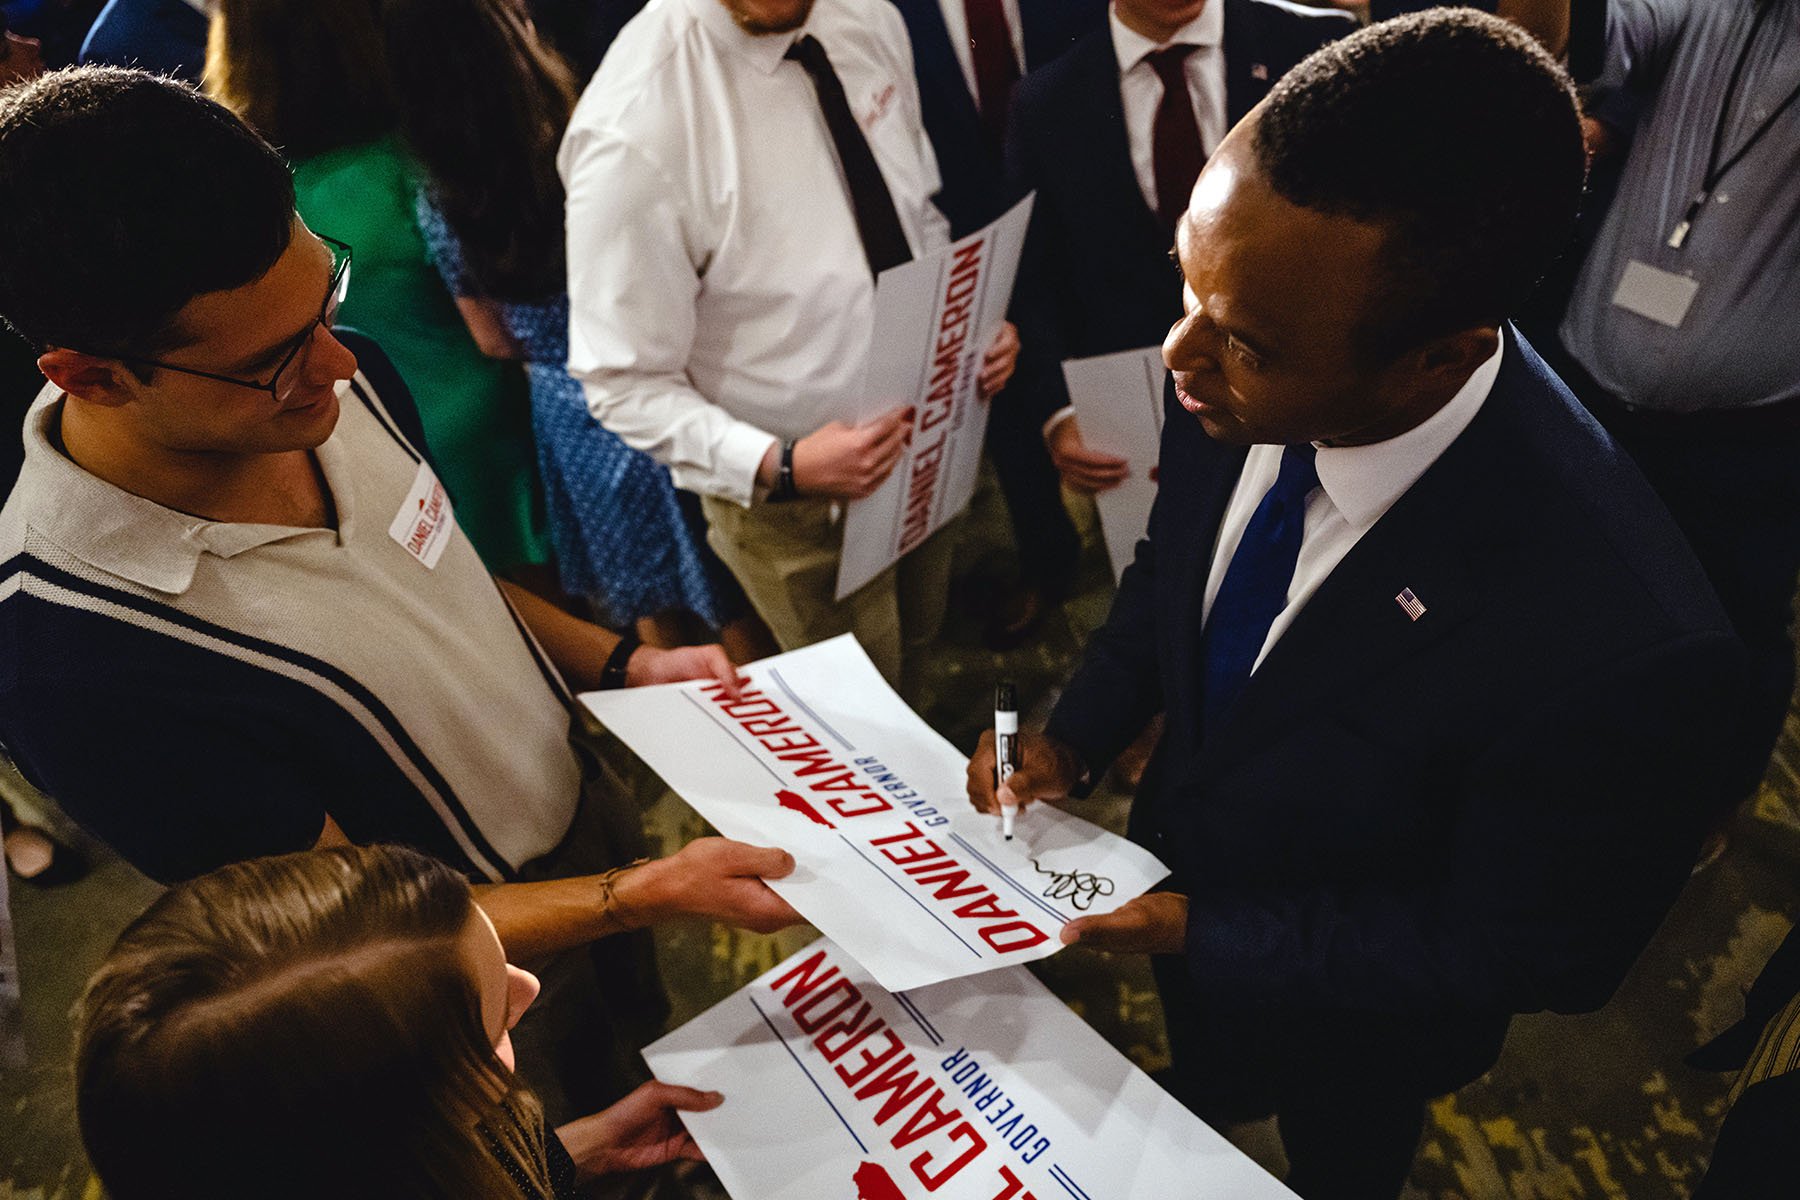 Kentucky Attorney General Daniel Cameron signs a campaign sign for a supporter.